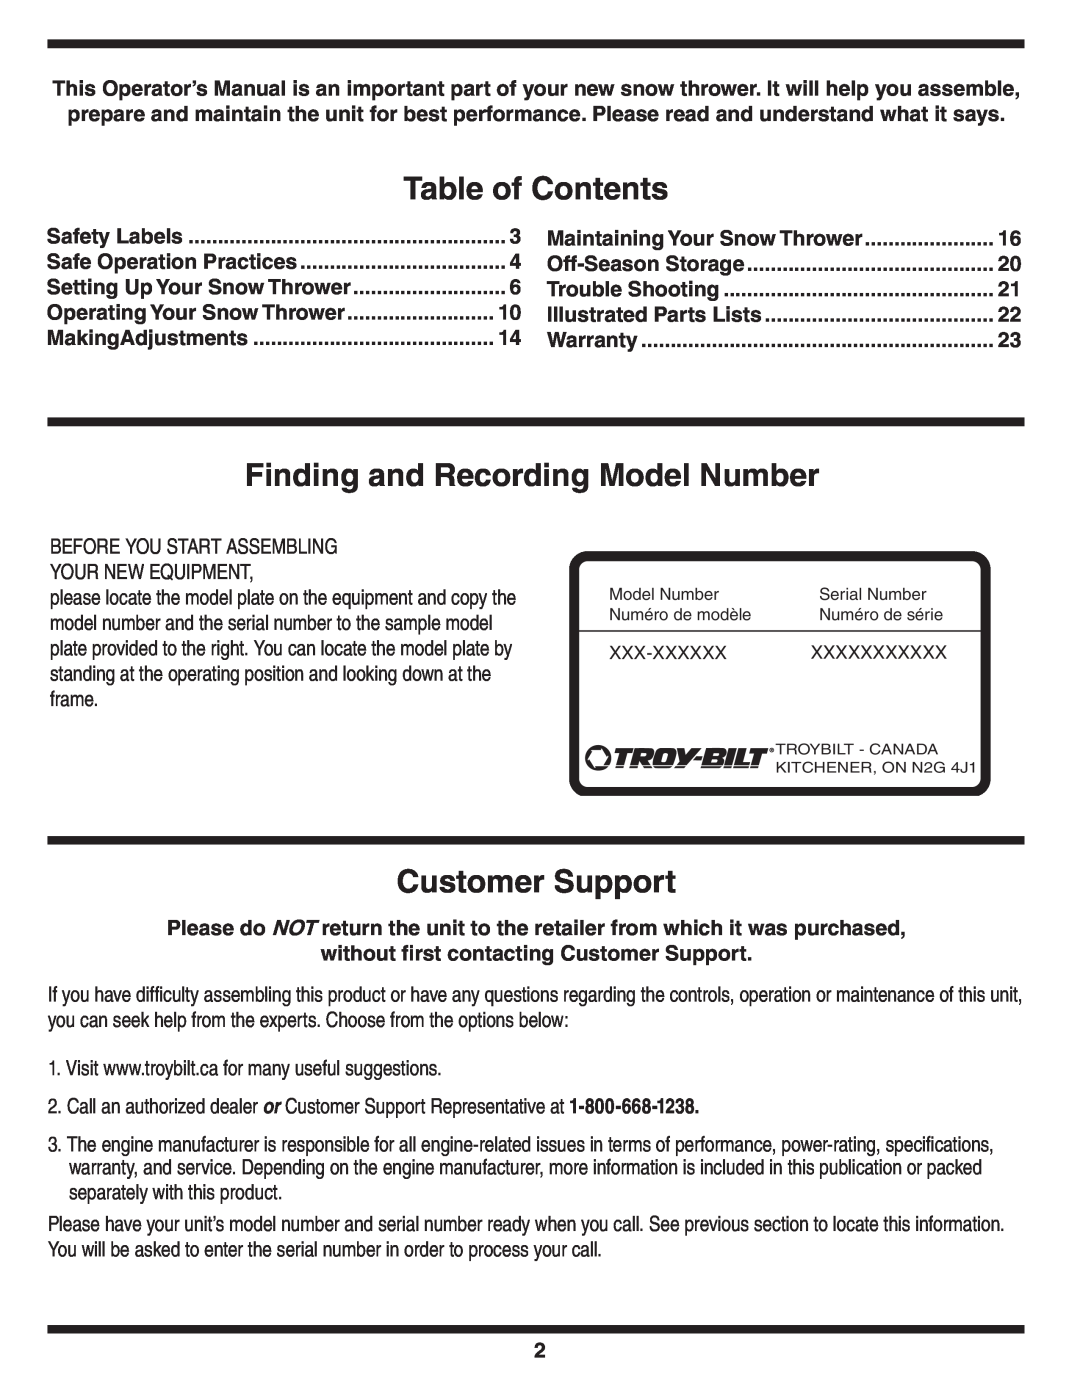 Troy-Bilt 769-03800 warranty Table of Contents, Finding and Recording Model Number, Customer Support 